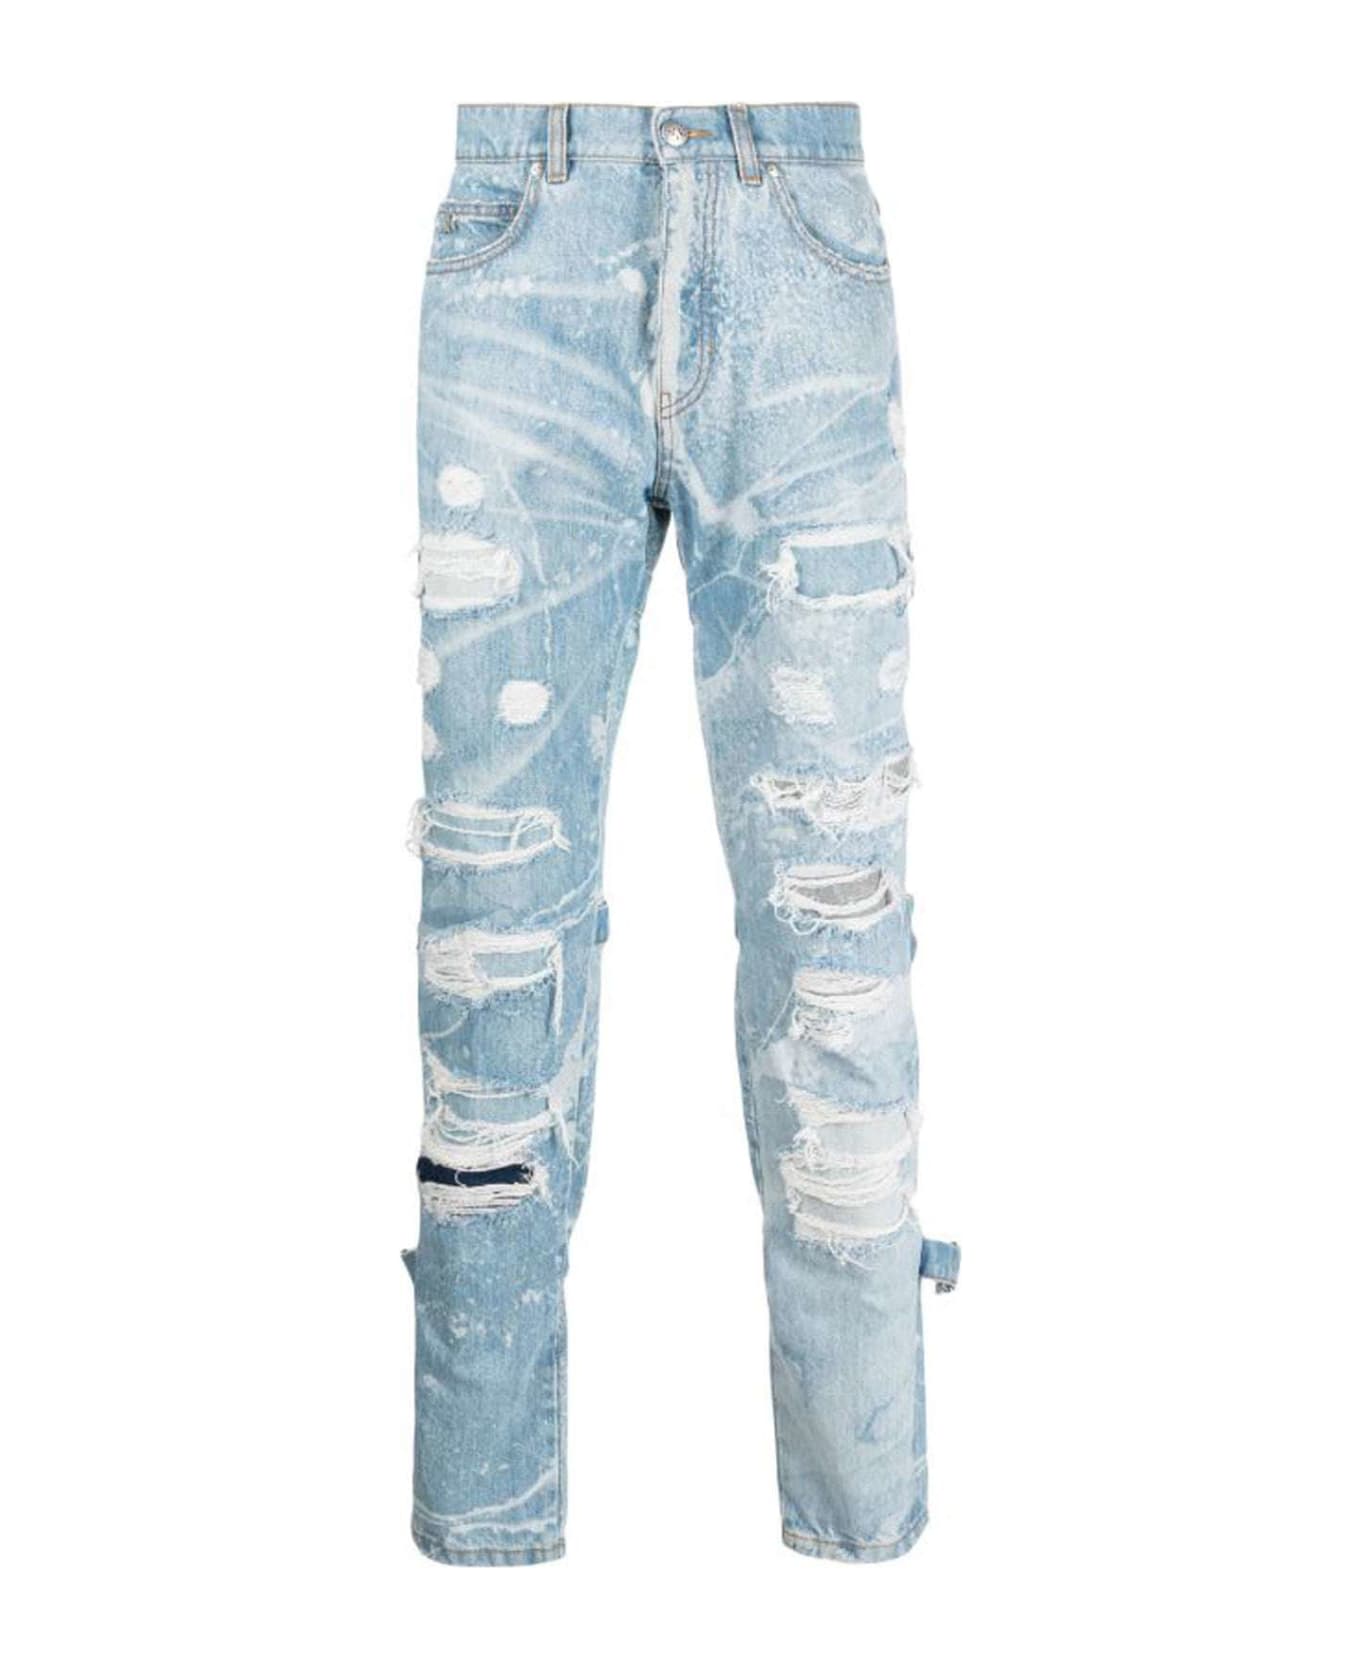 John Richmond Slim Wearability Jeans In 100% Cotton With Used Effect Lacerations - Denim